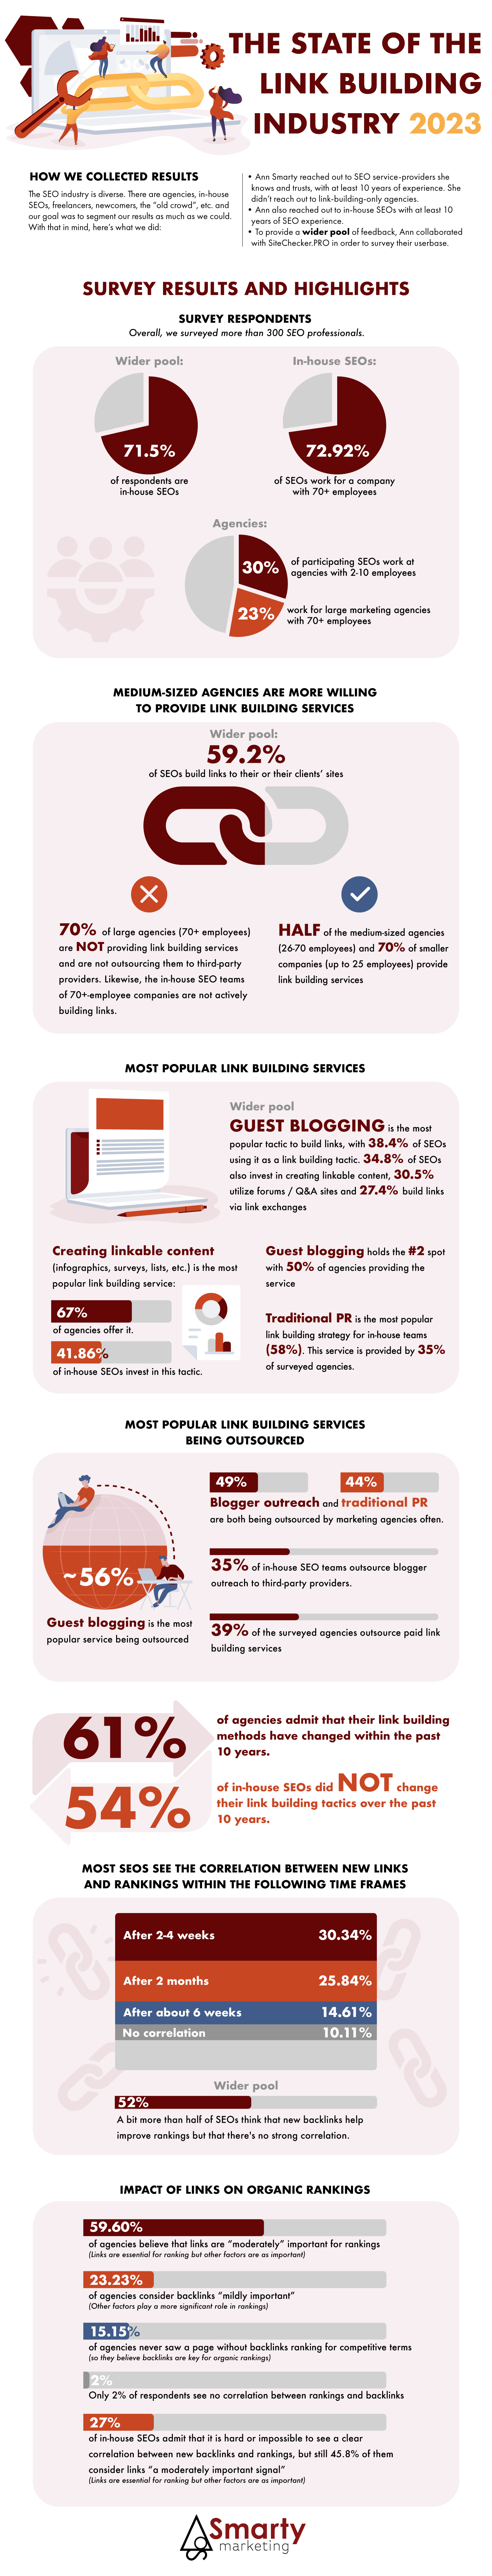 The State of Link Building Industry 2023 - Infographic